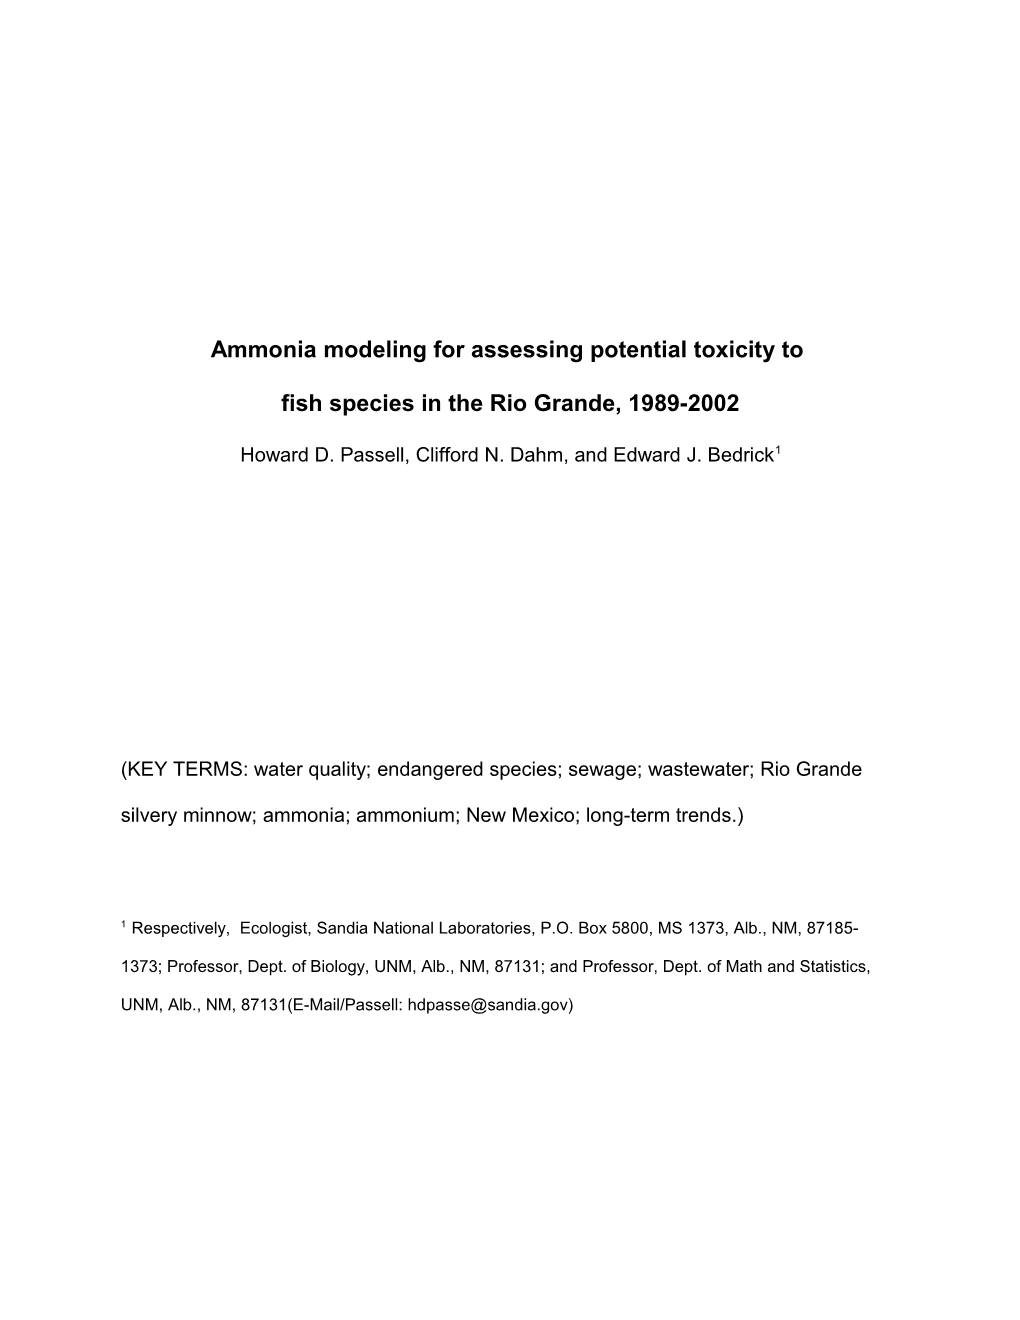 Ammonia Modeling for Assessing Potential Toxicity to Fish Species in the Rio Grande, 1989-2002